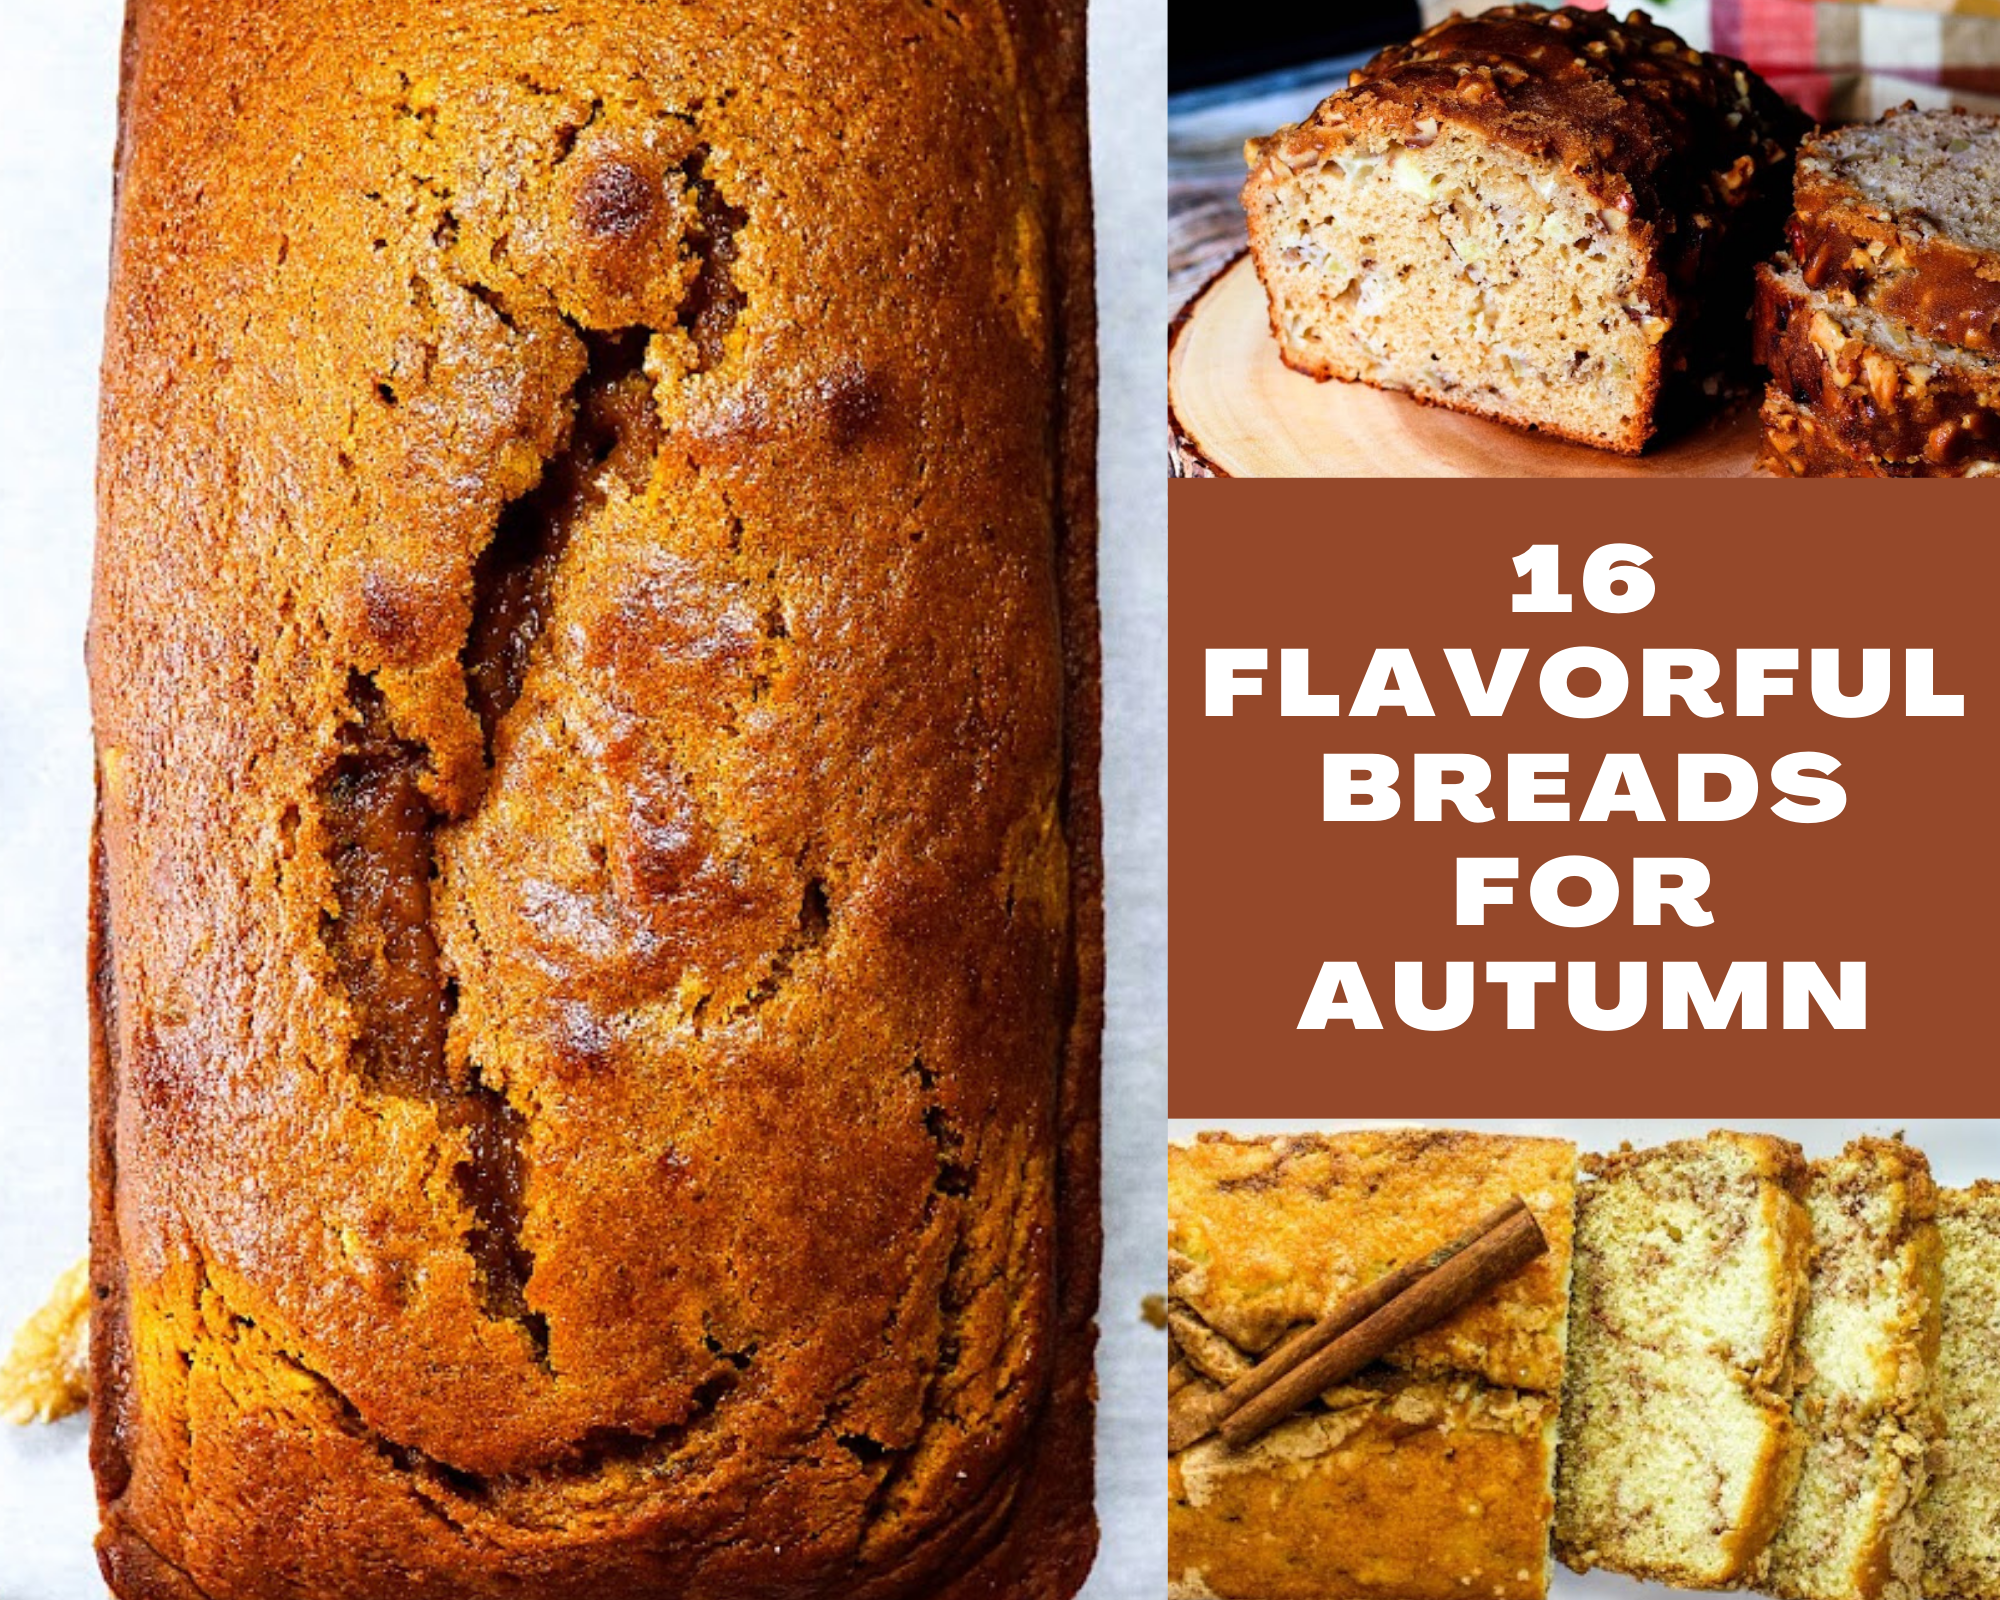 16 flavorful breads for Autumn